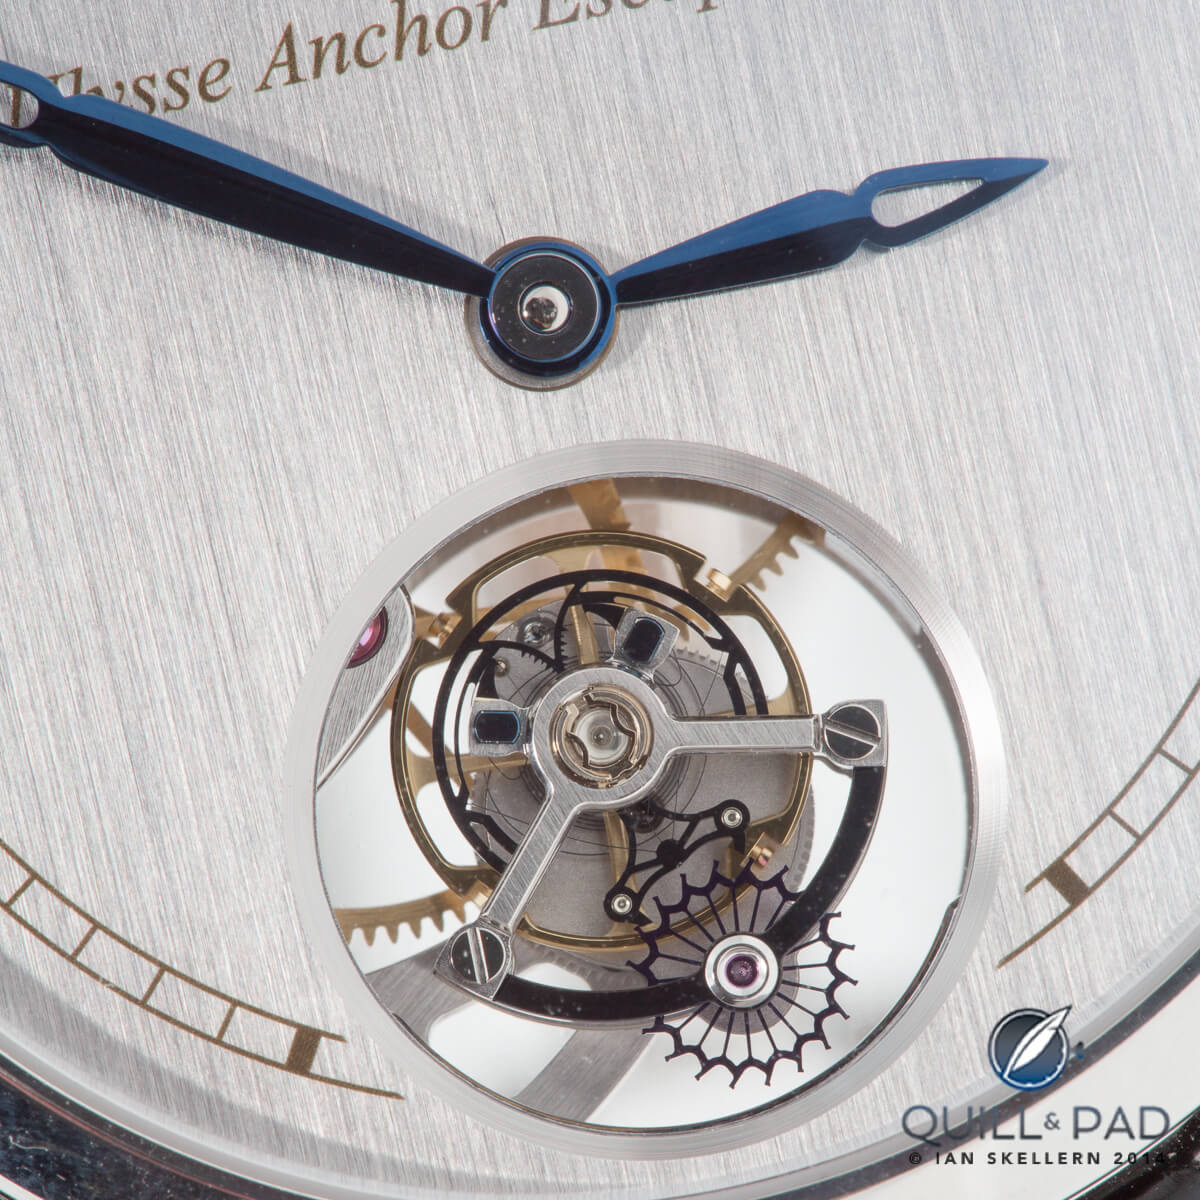 New escapement by Ulysee Nardin